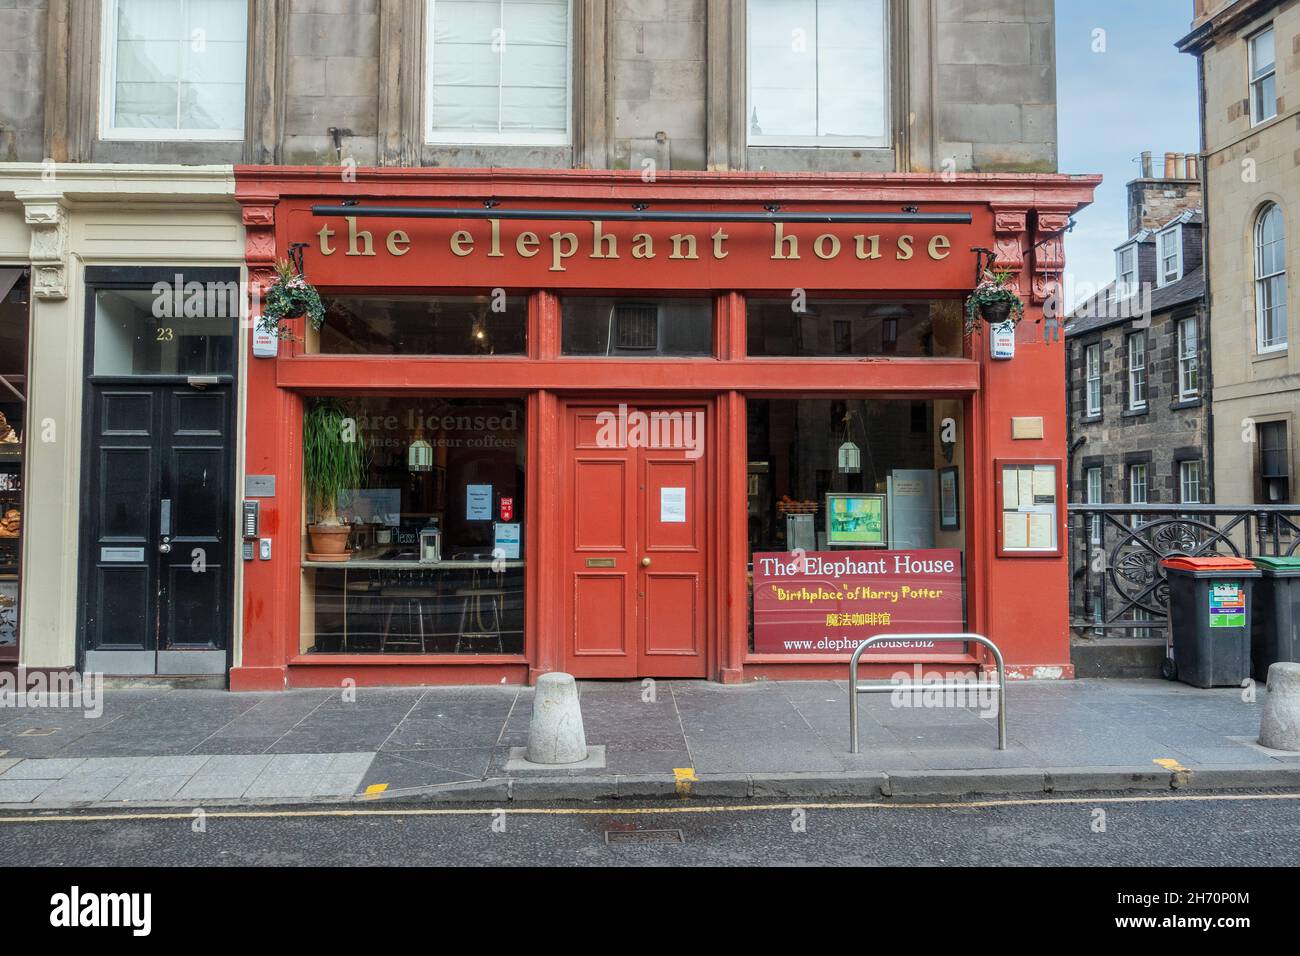 The Elephant House Coffee Shop Edinburgh Famous For J.K. Rawlings Writing In This Cafe Harry Potter Shop Closed Early Morning No People Stock Photo